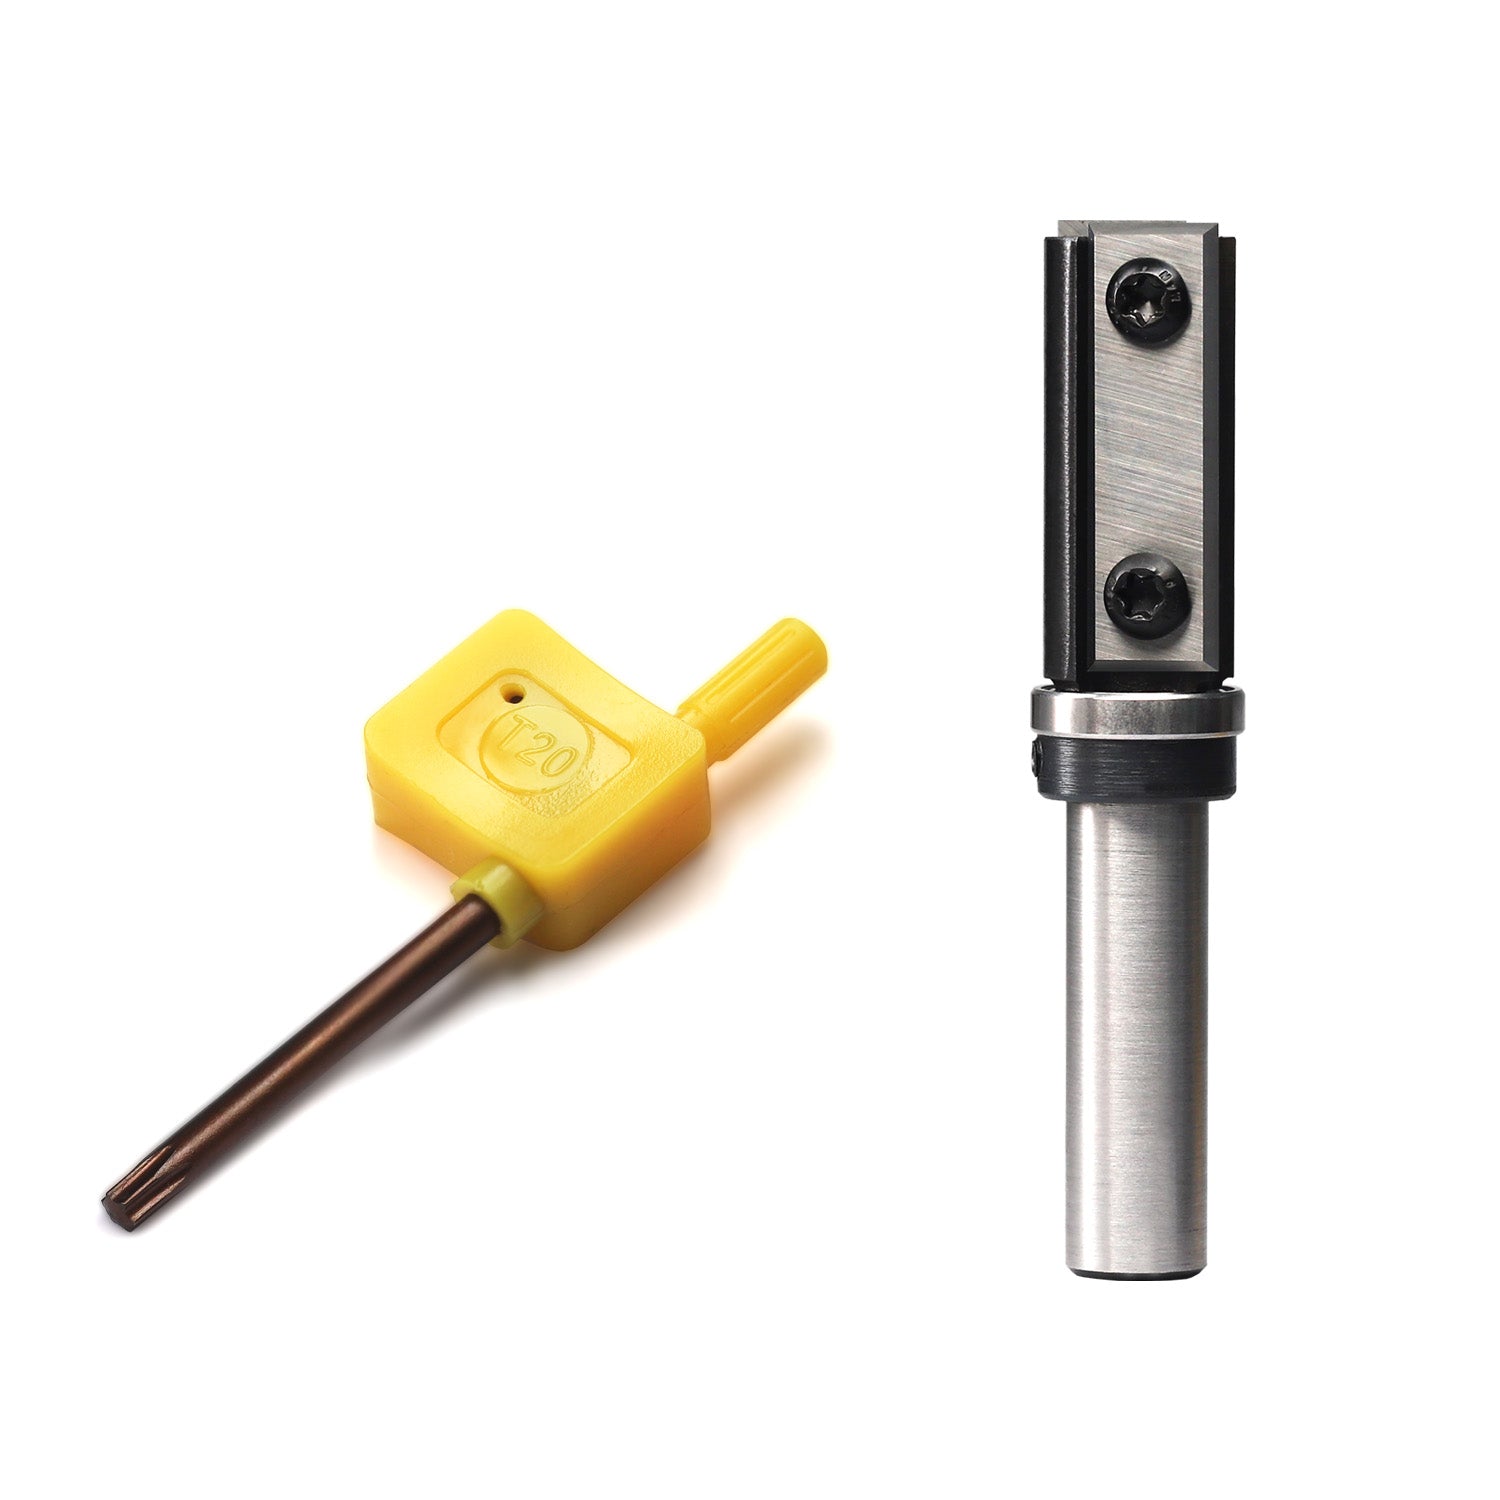 yeptooling 1/2 inch shank top bearing flush trim router bit with 2 pieces 39.5x12x1.5mm carbide insert blades